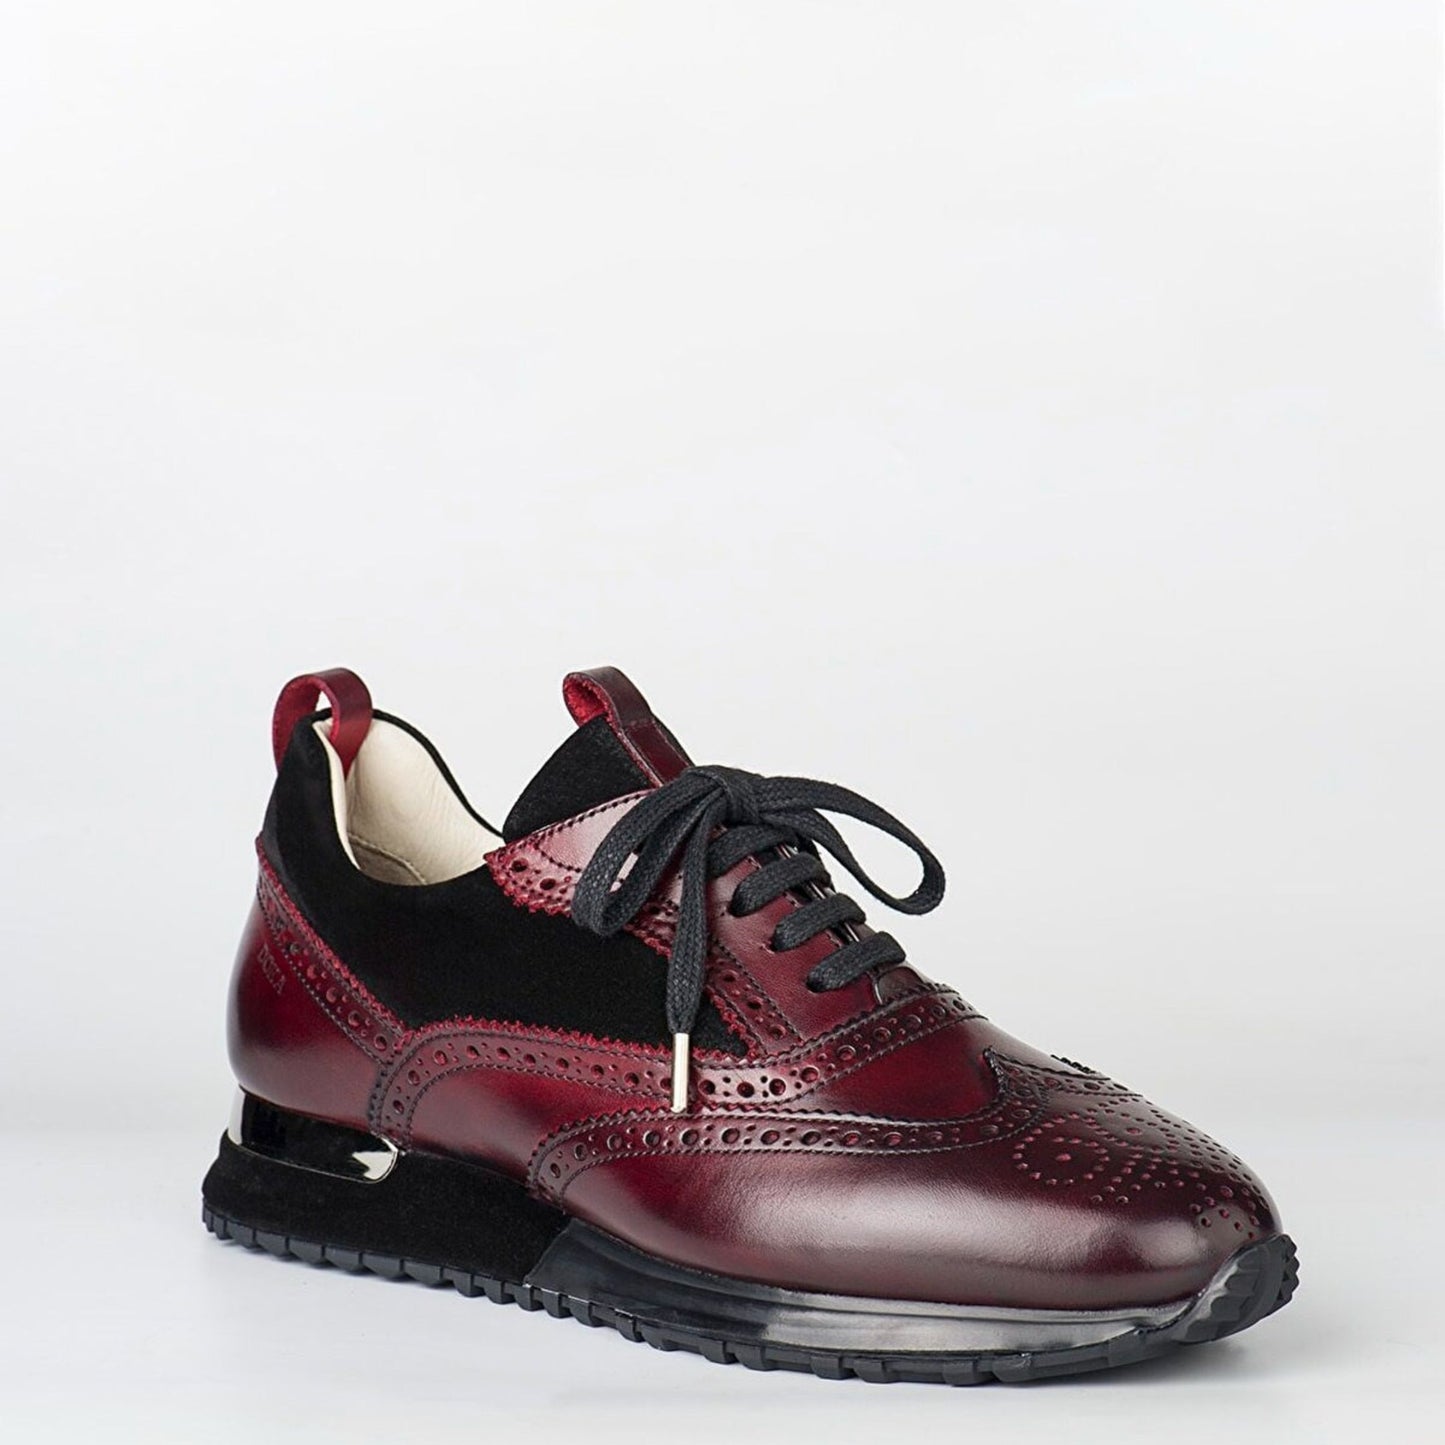 Madasat Burgundy Leather Sneakers - 216 |